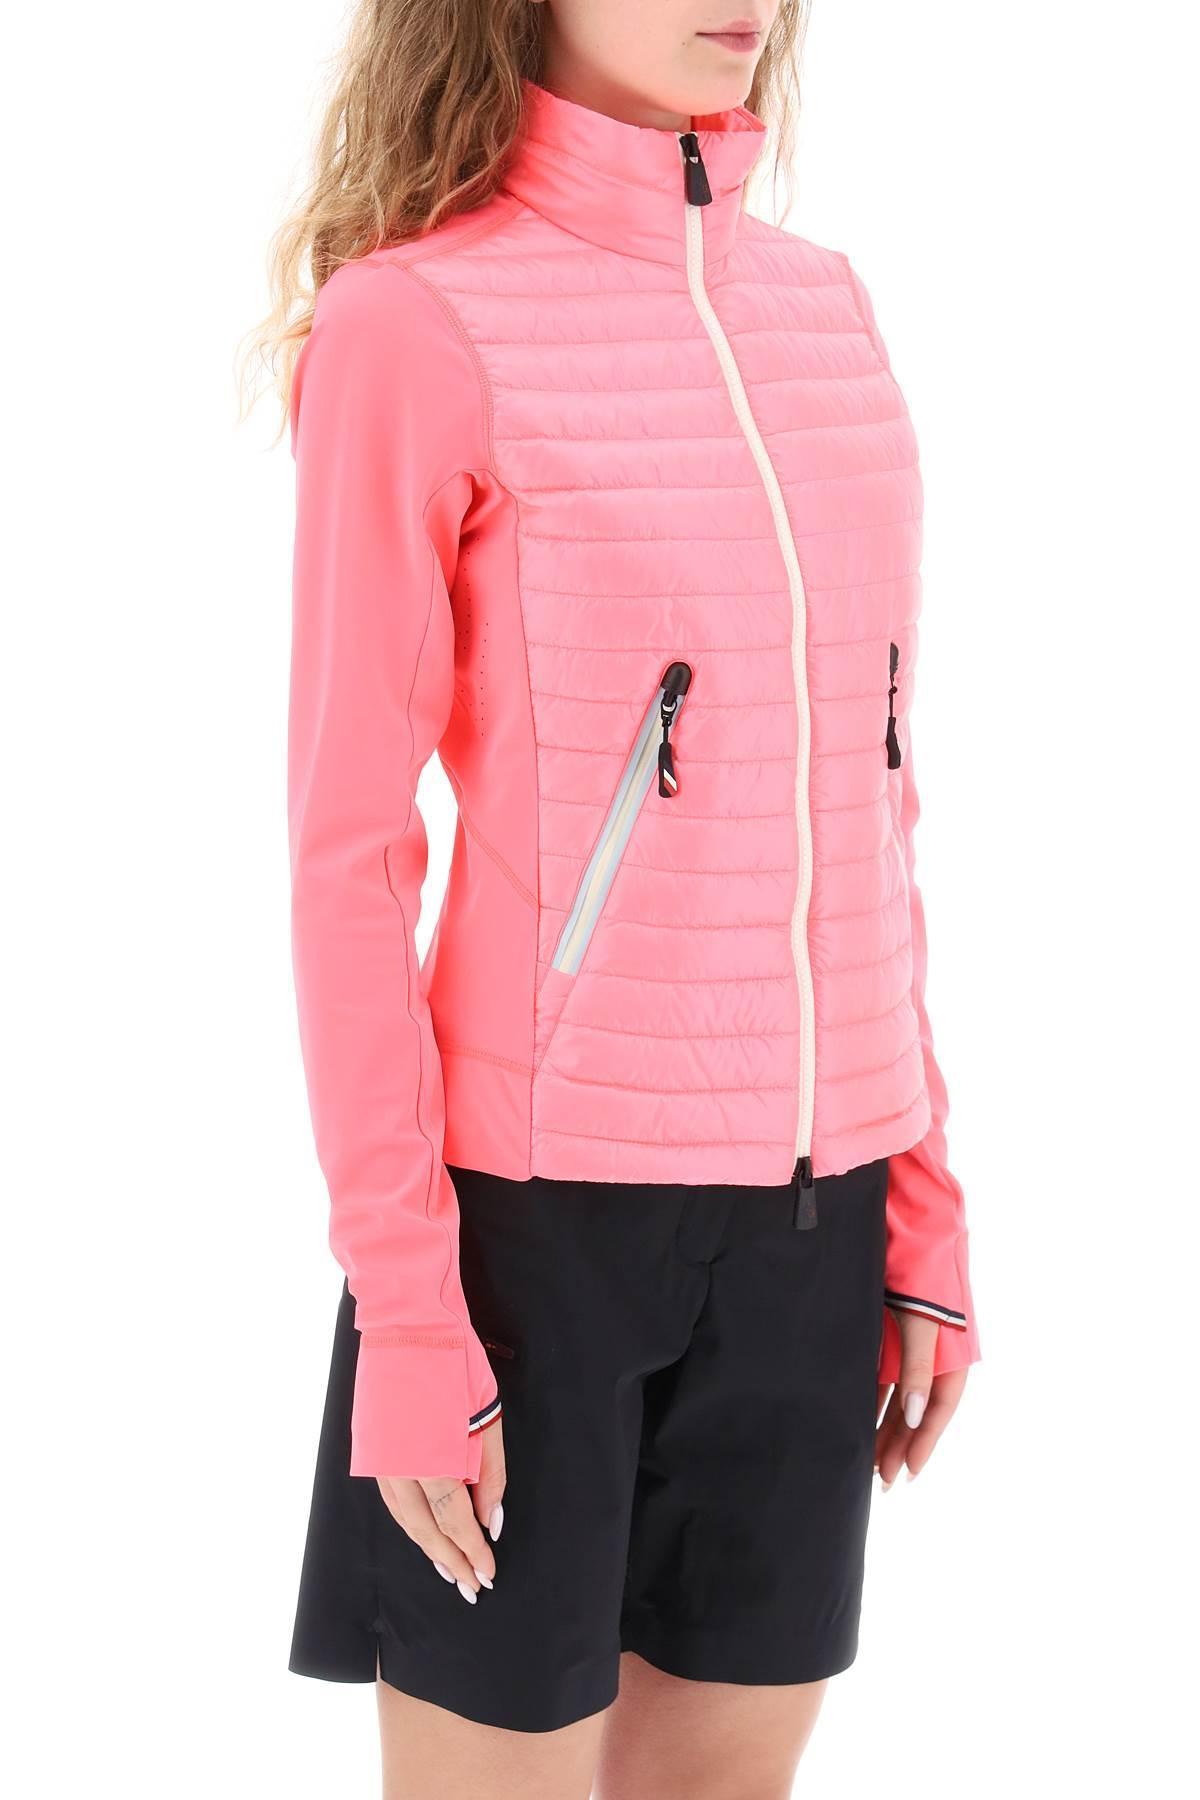 3 MONCLER GRENOBLE Padded Technical Jersey Jacket in Pink | Lyst